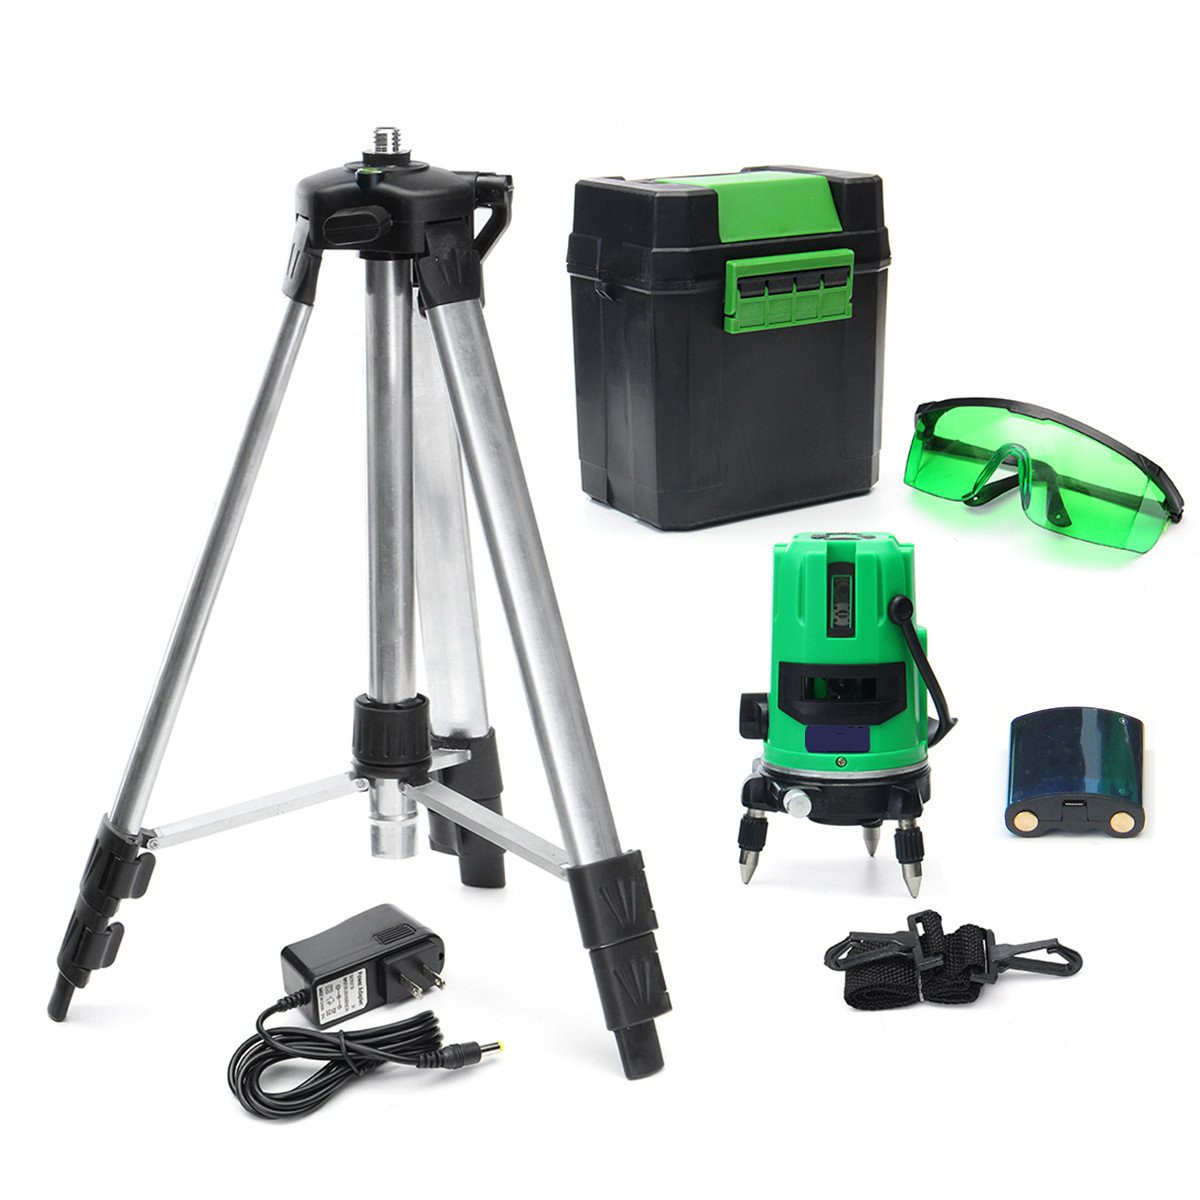 Green-3-Line-4-Points-Laser-Level-360-Rotary-Laser-Line-Self-Leveling-with-Tripod-1166737-10